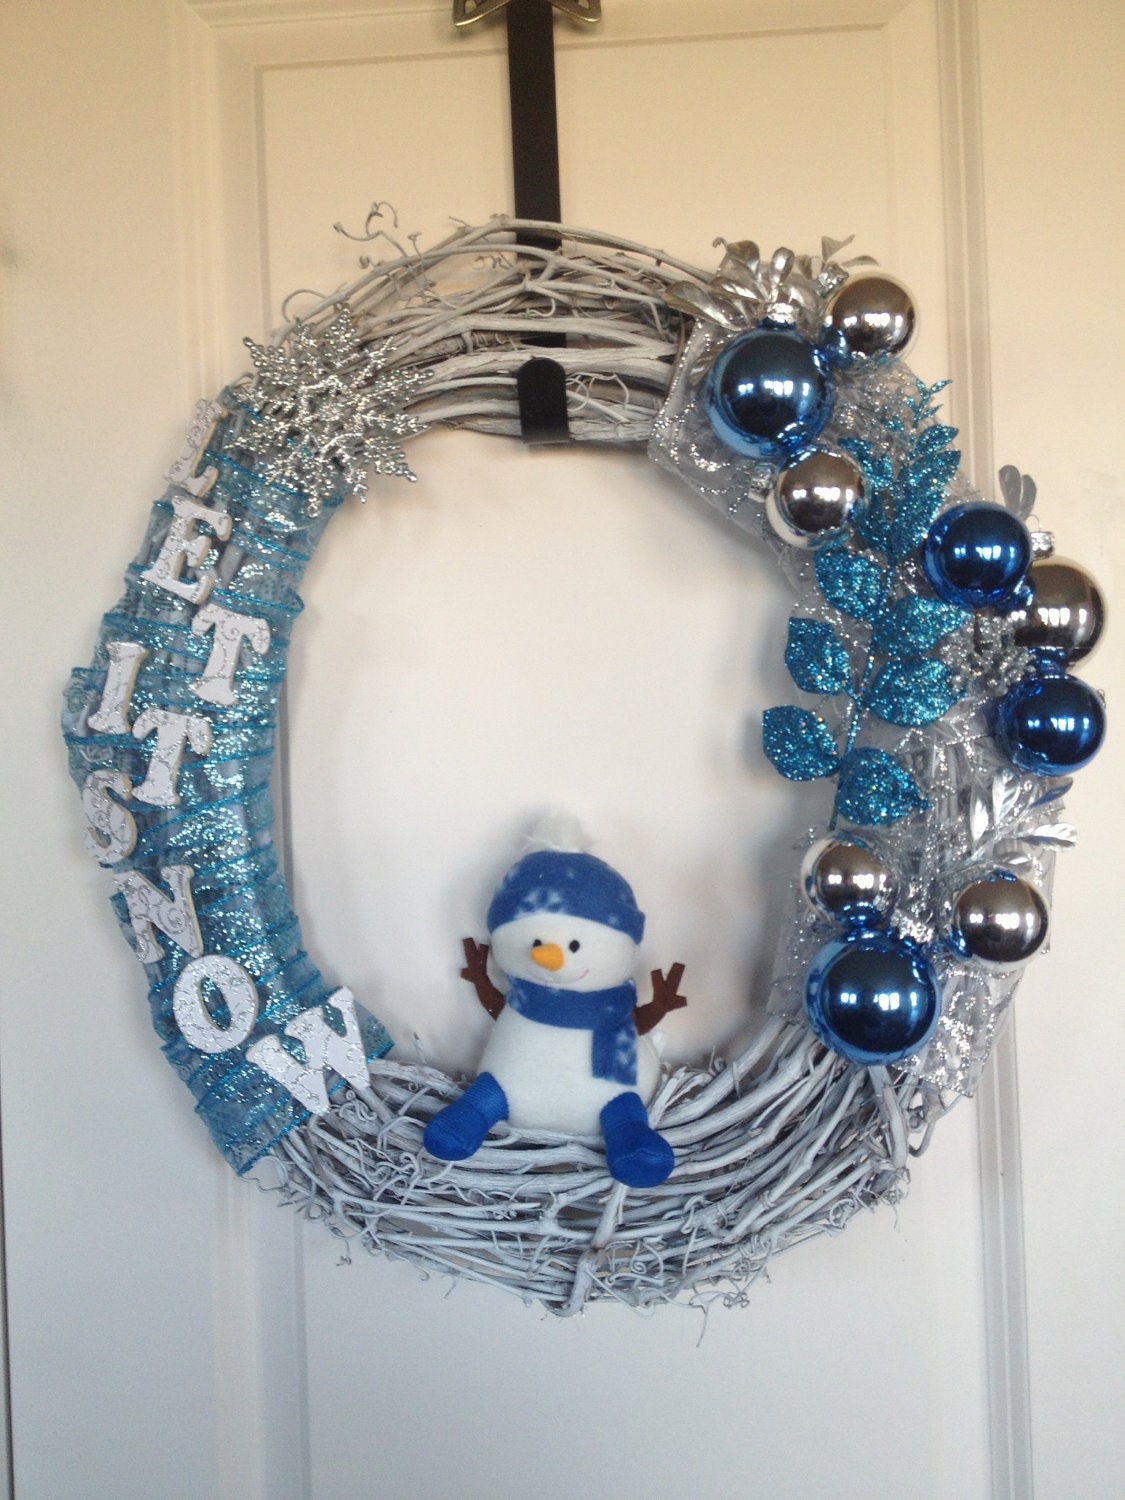 Holiday Wreaths Designs, with characters - AshleysCustomWreaths